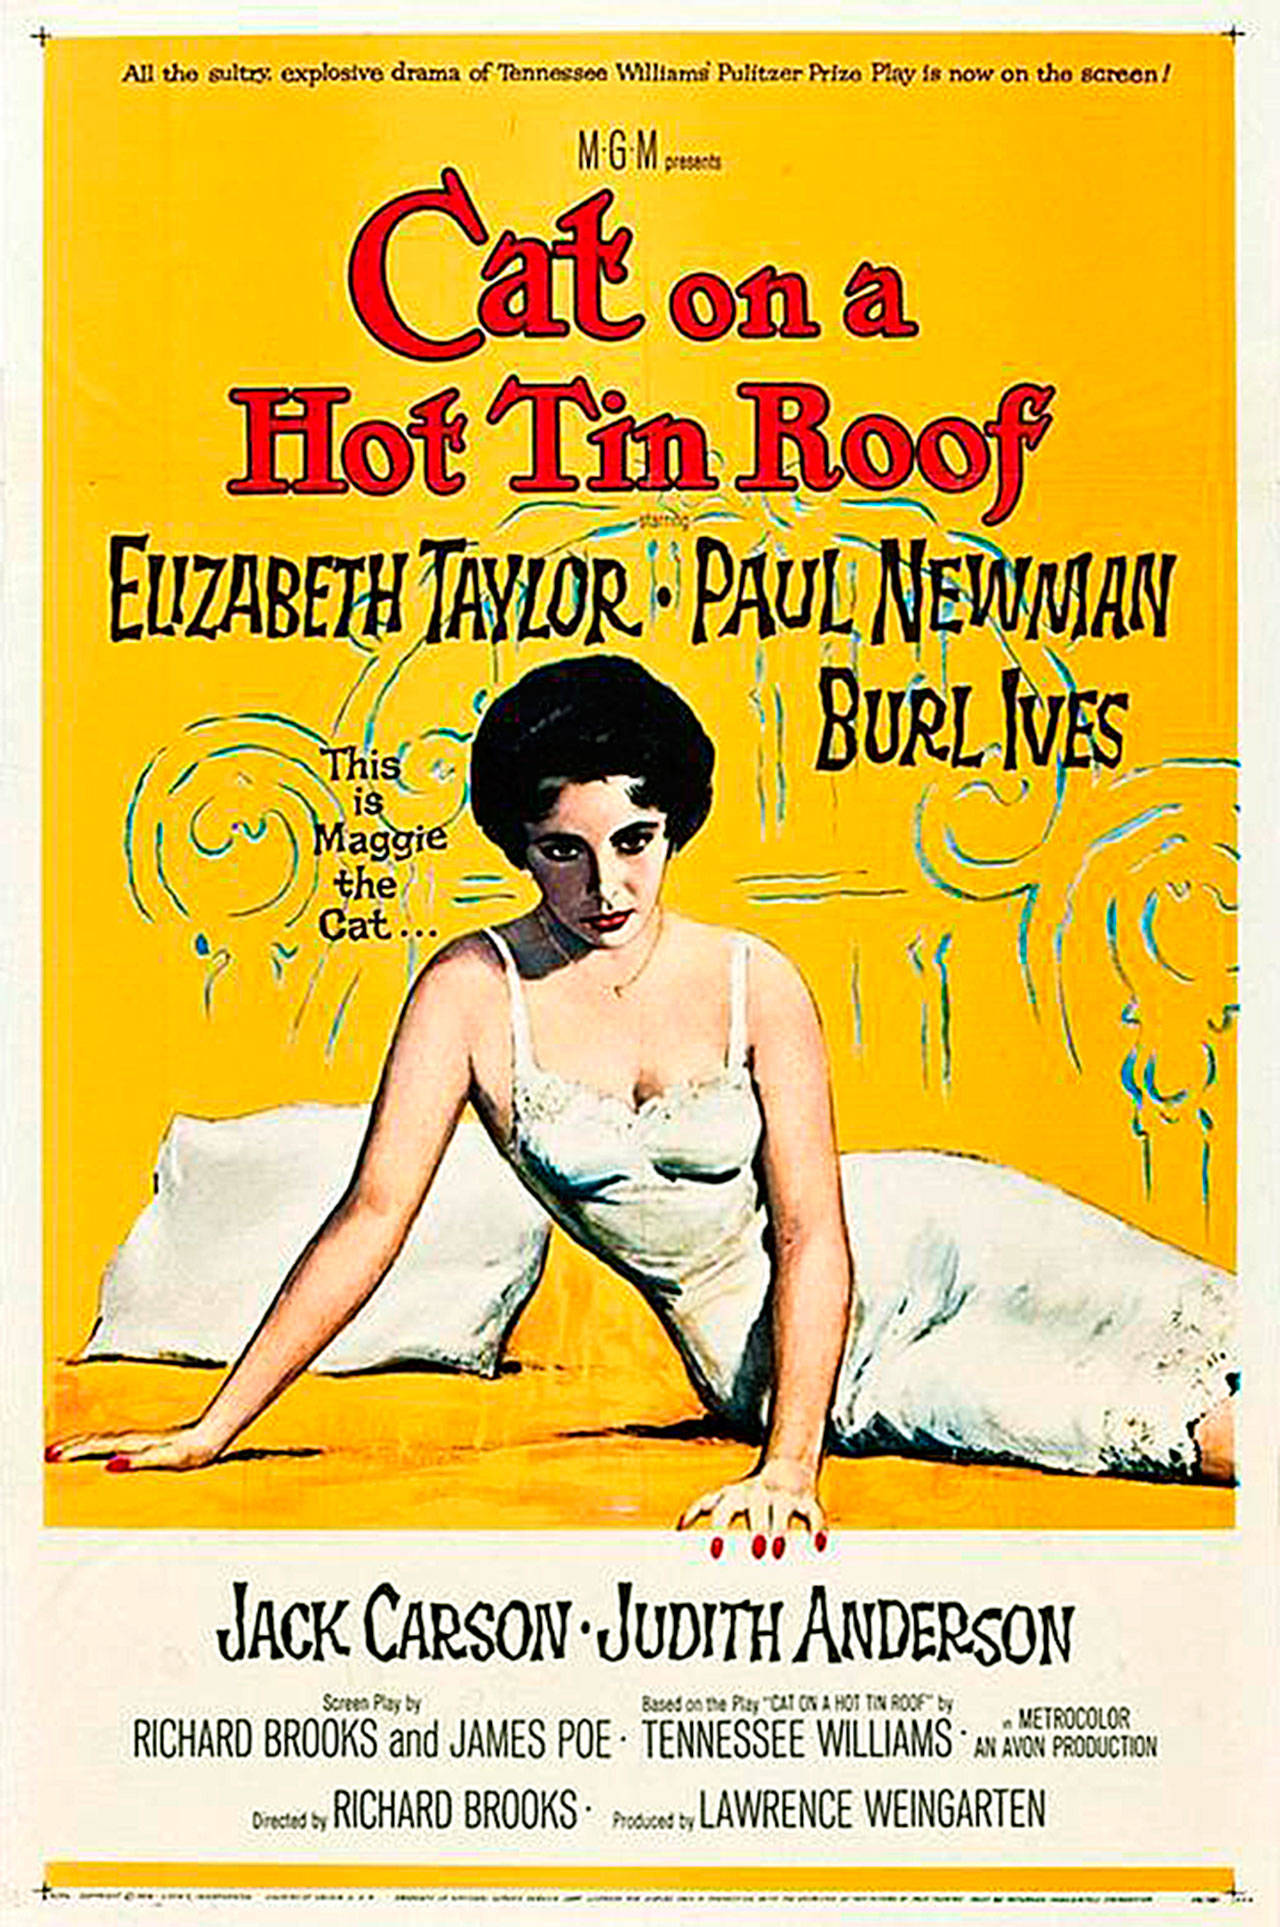 Film fans to screen ‘Cat on a Hot Tin Roof’